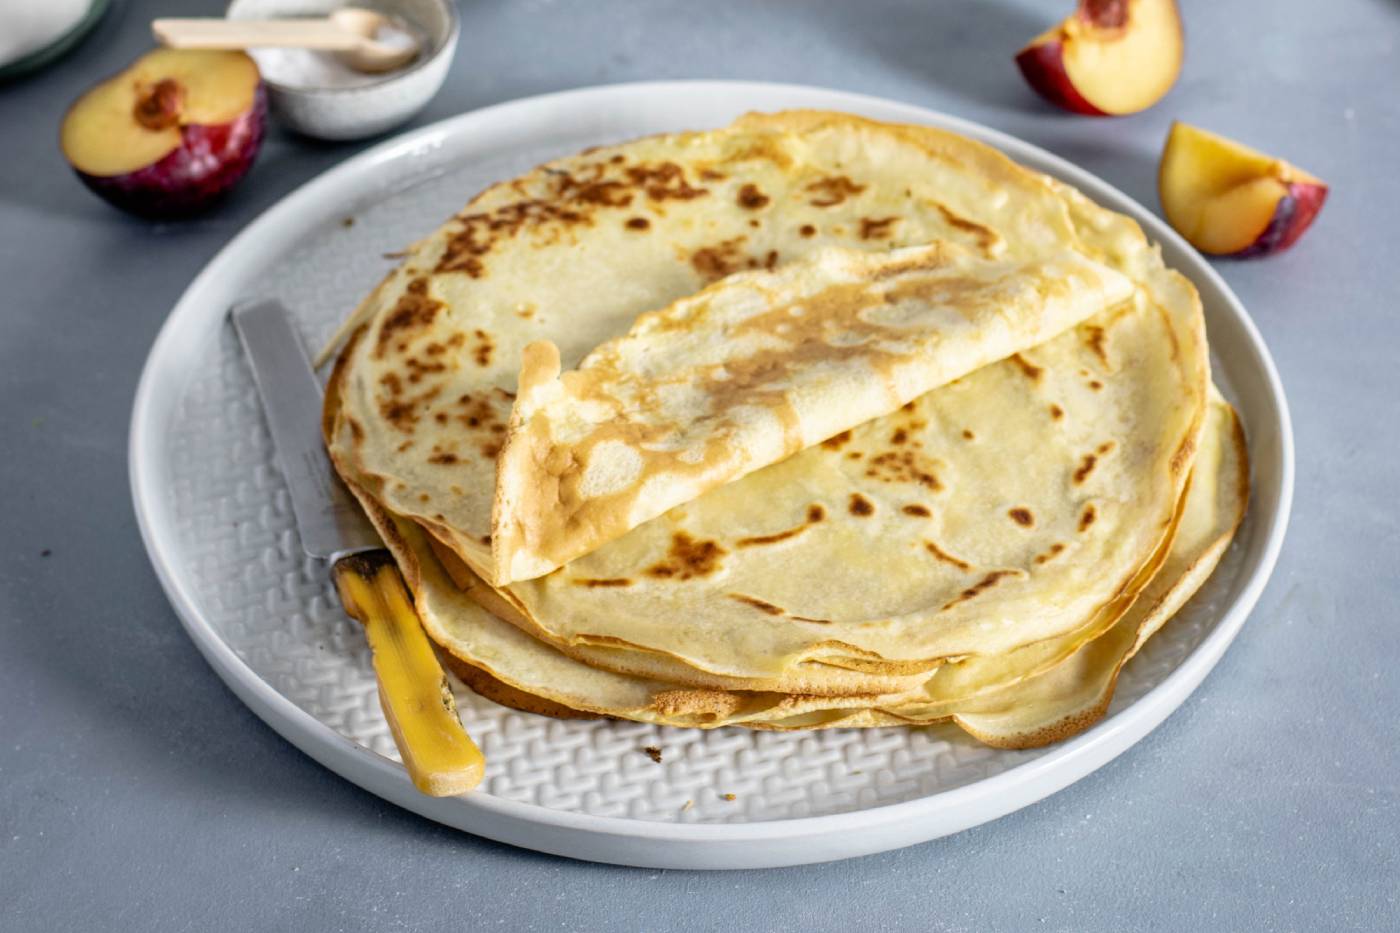 When is Pancake Day 2019 and why do we celebrate it?